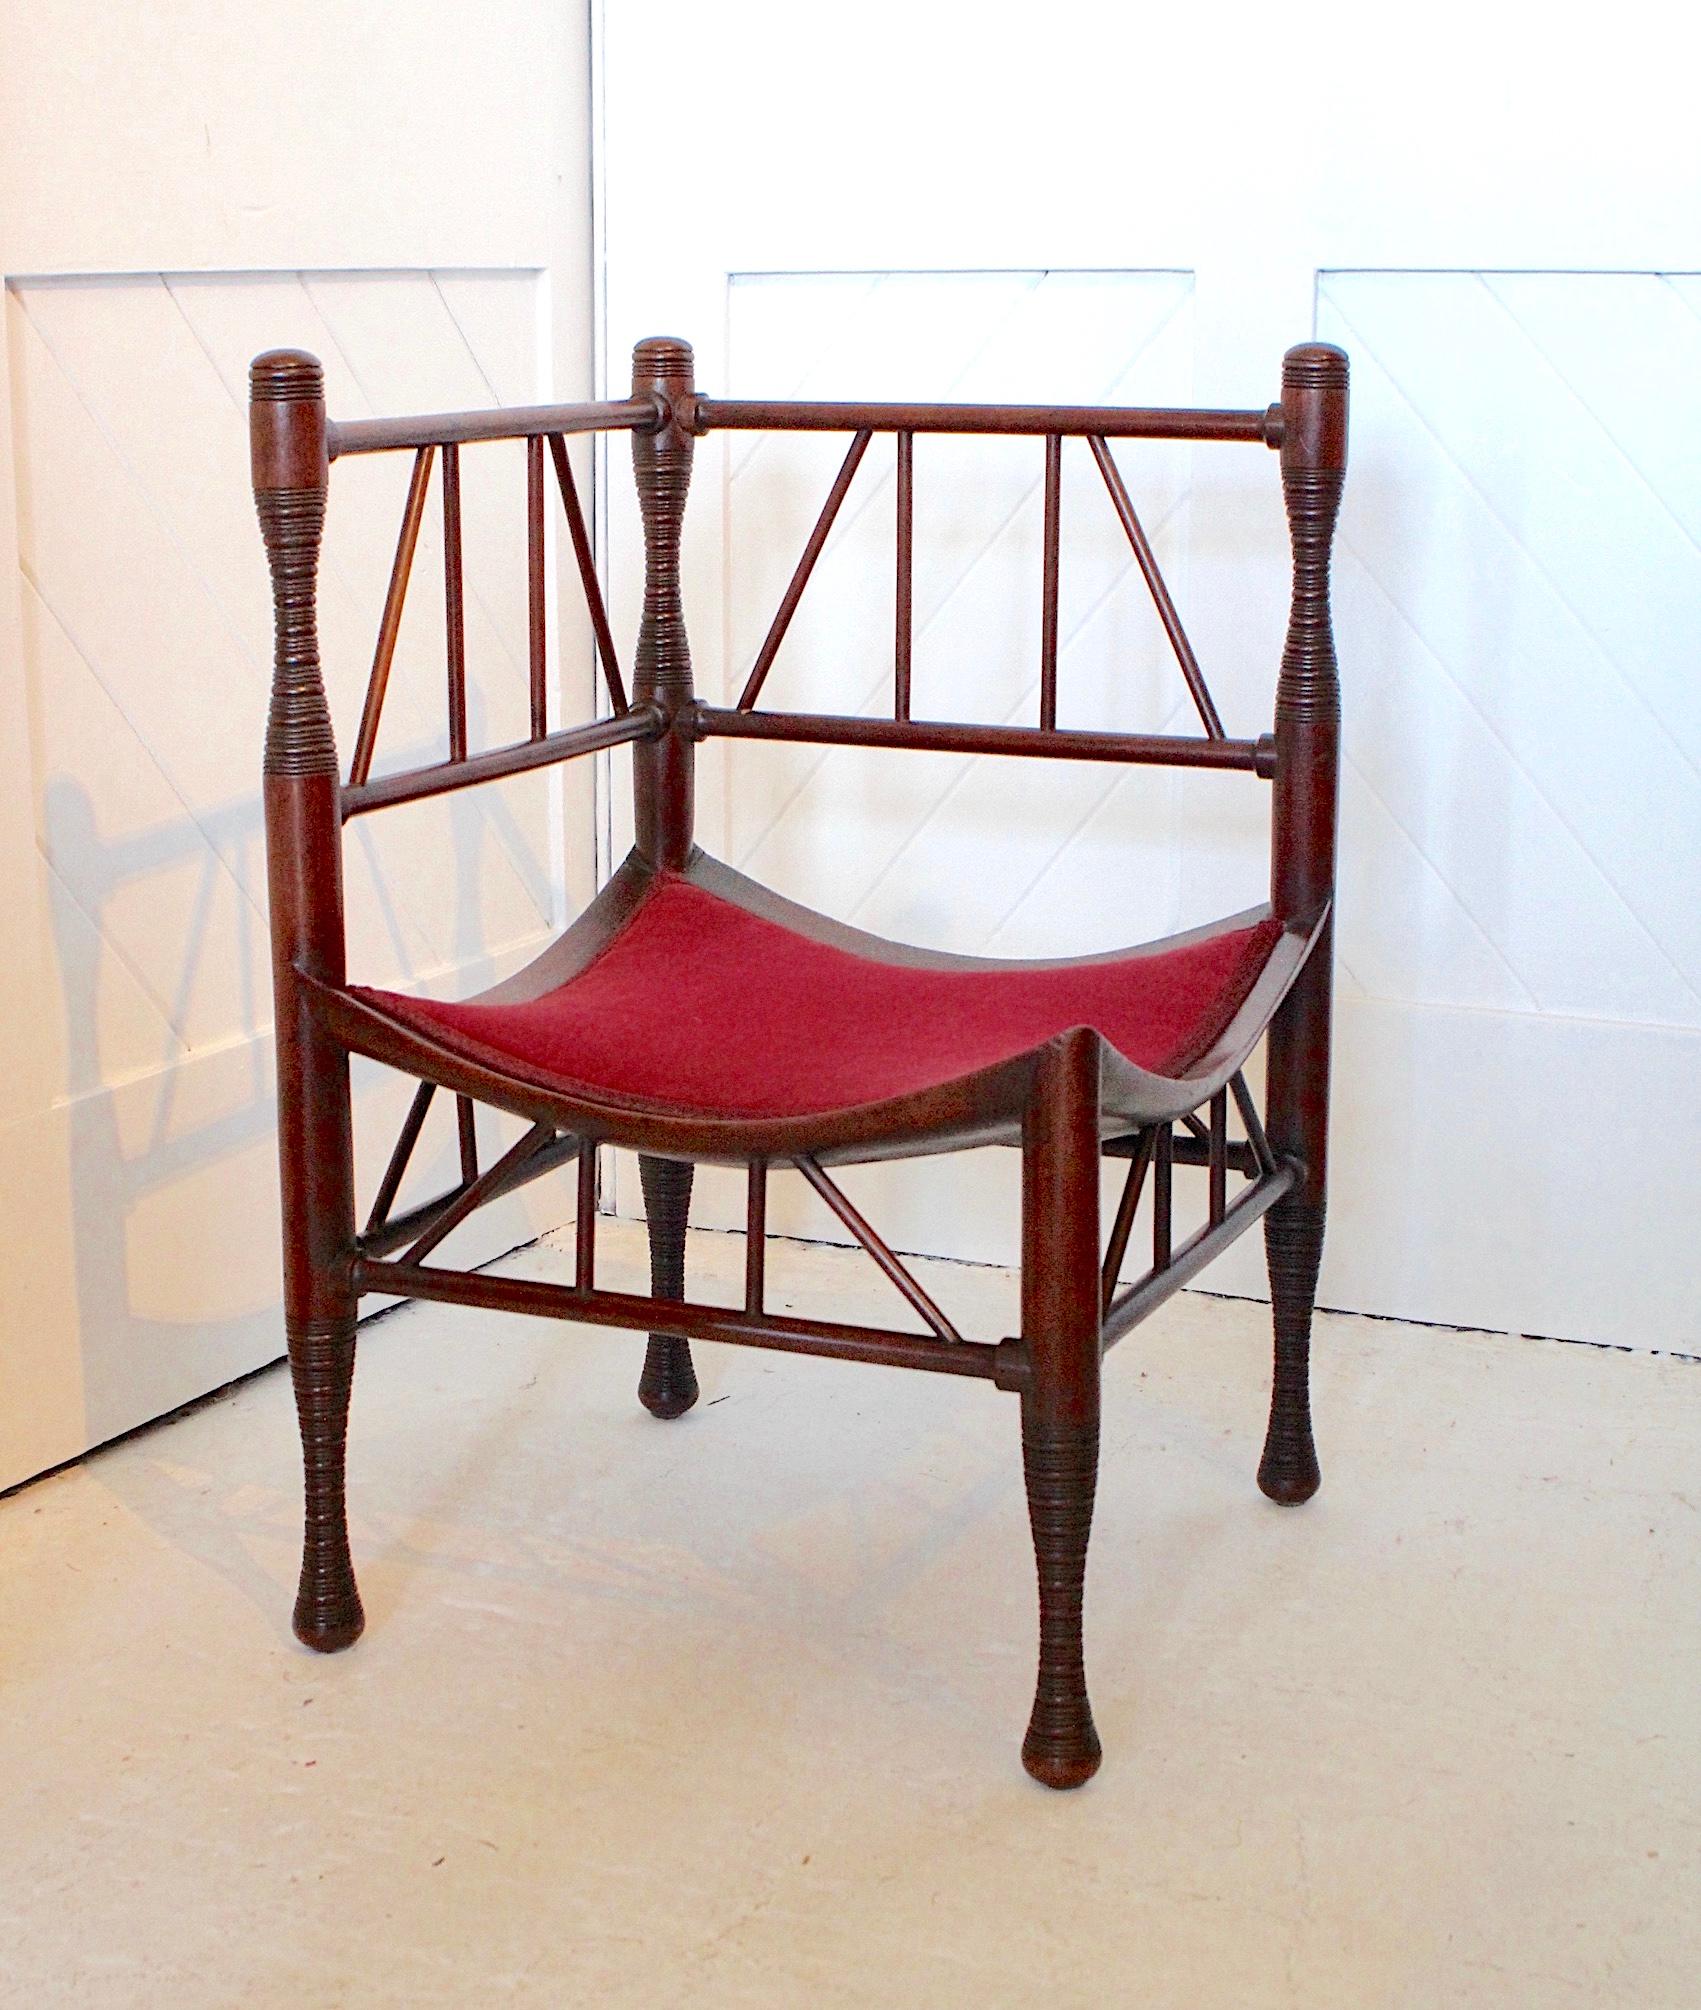 Aesthetic Movement rare ‘Thebes’ walnut corner chair
Red velvet seat
By Liberty & Co
Circa 1875.
 